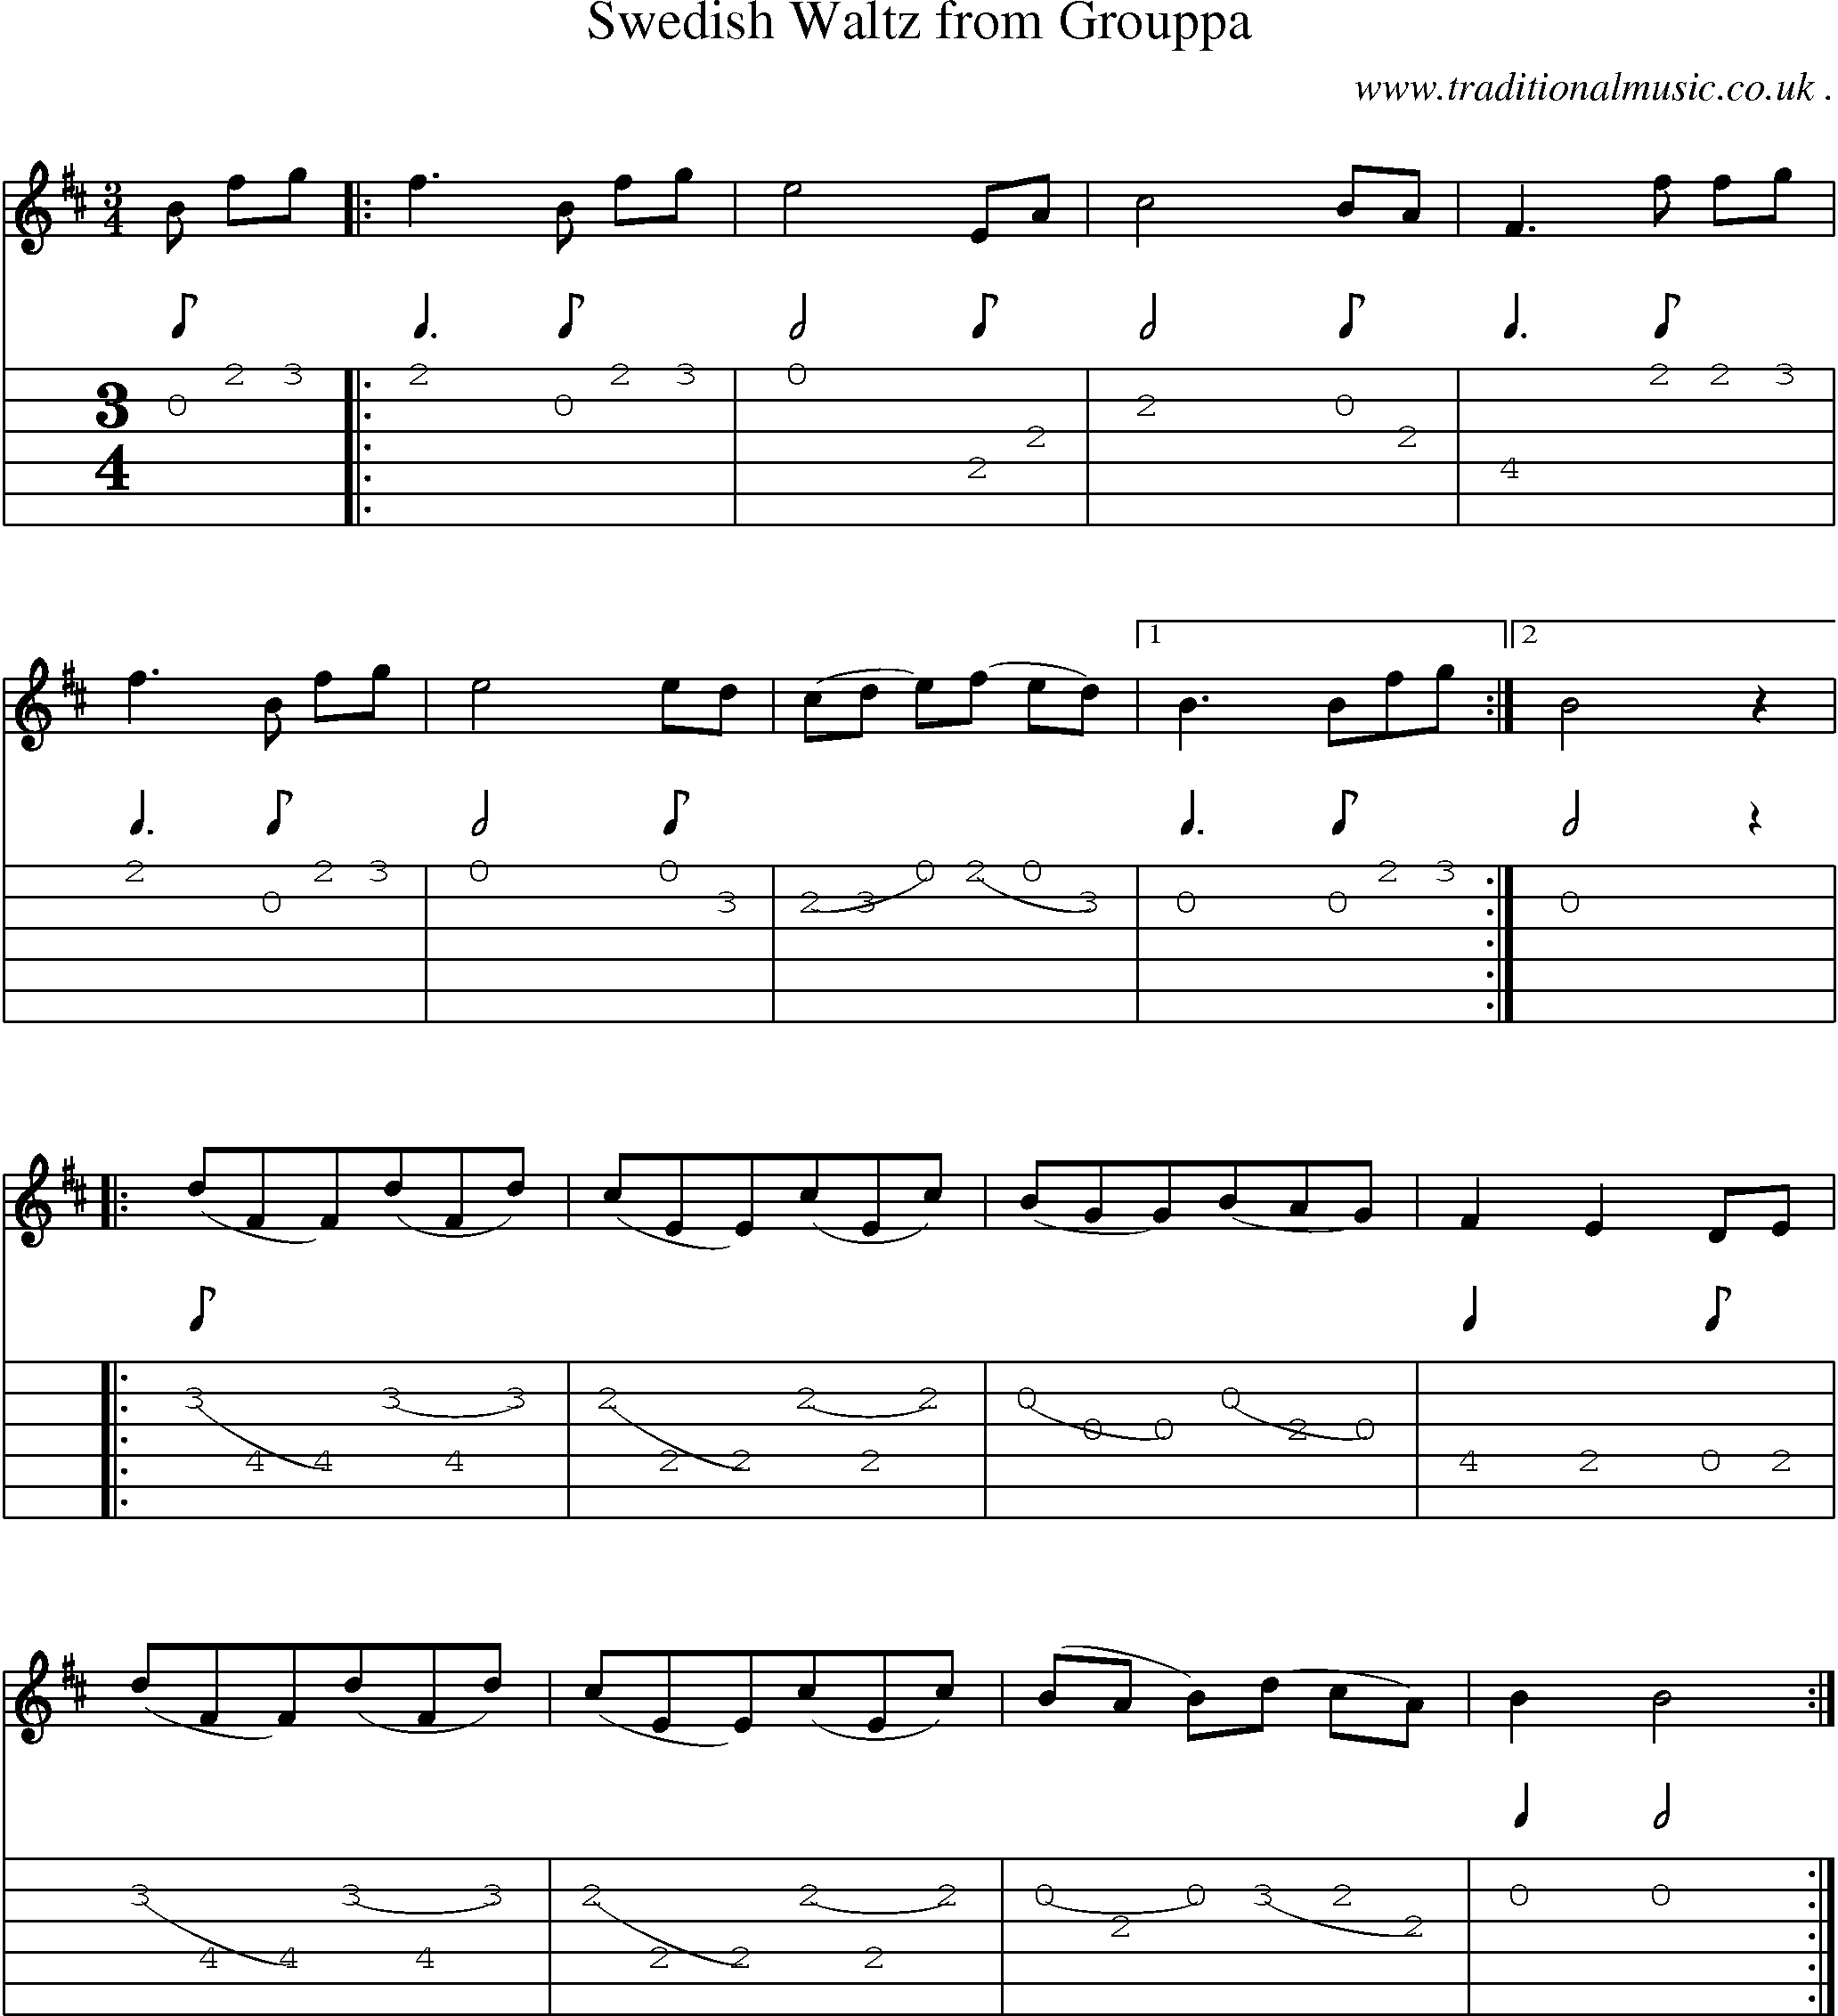 Sheet-Music and Guitar Tabs for Swedish Waltz From Grouppa